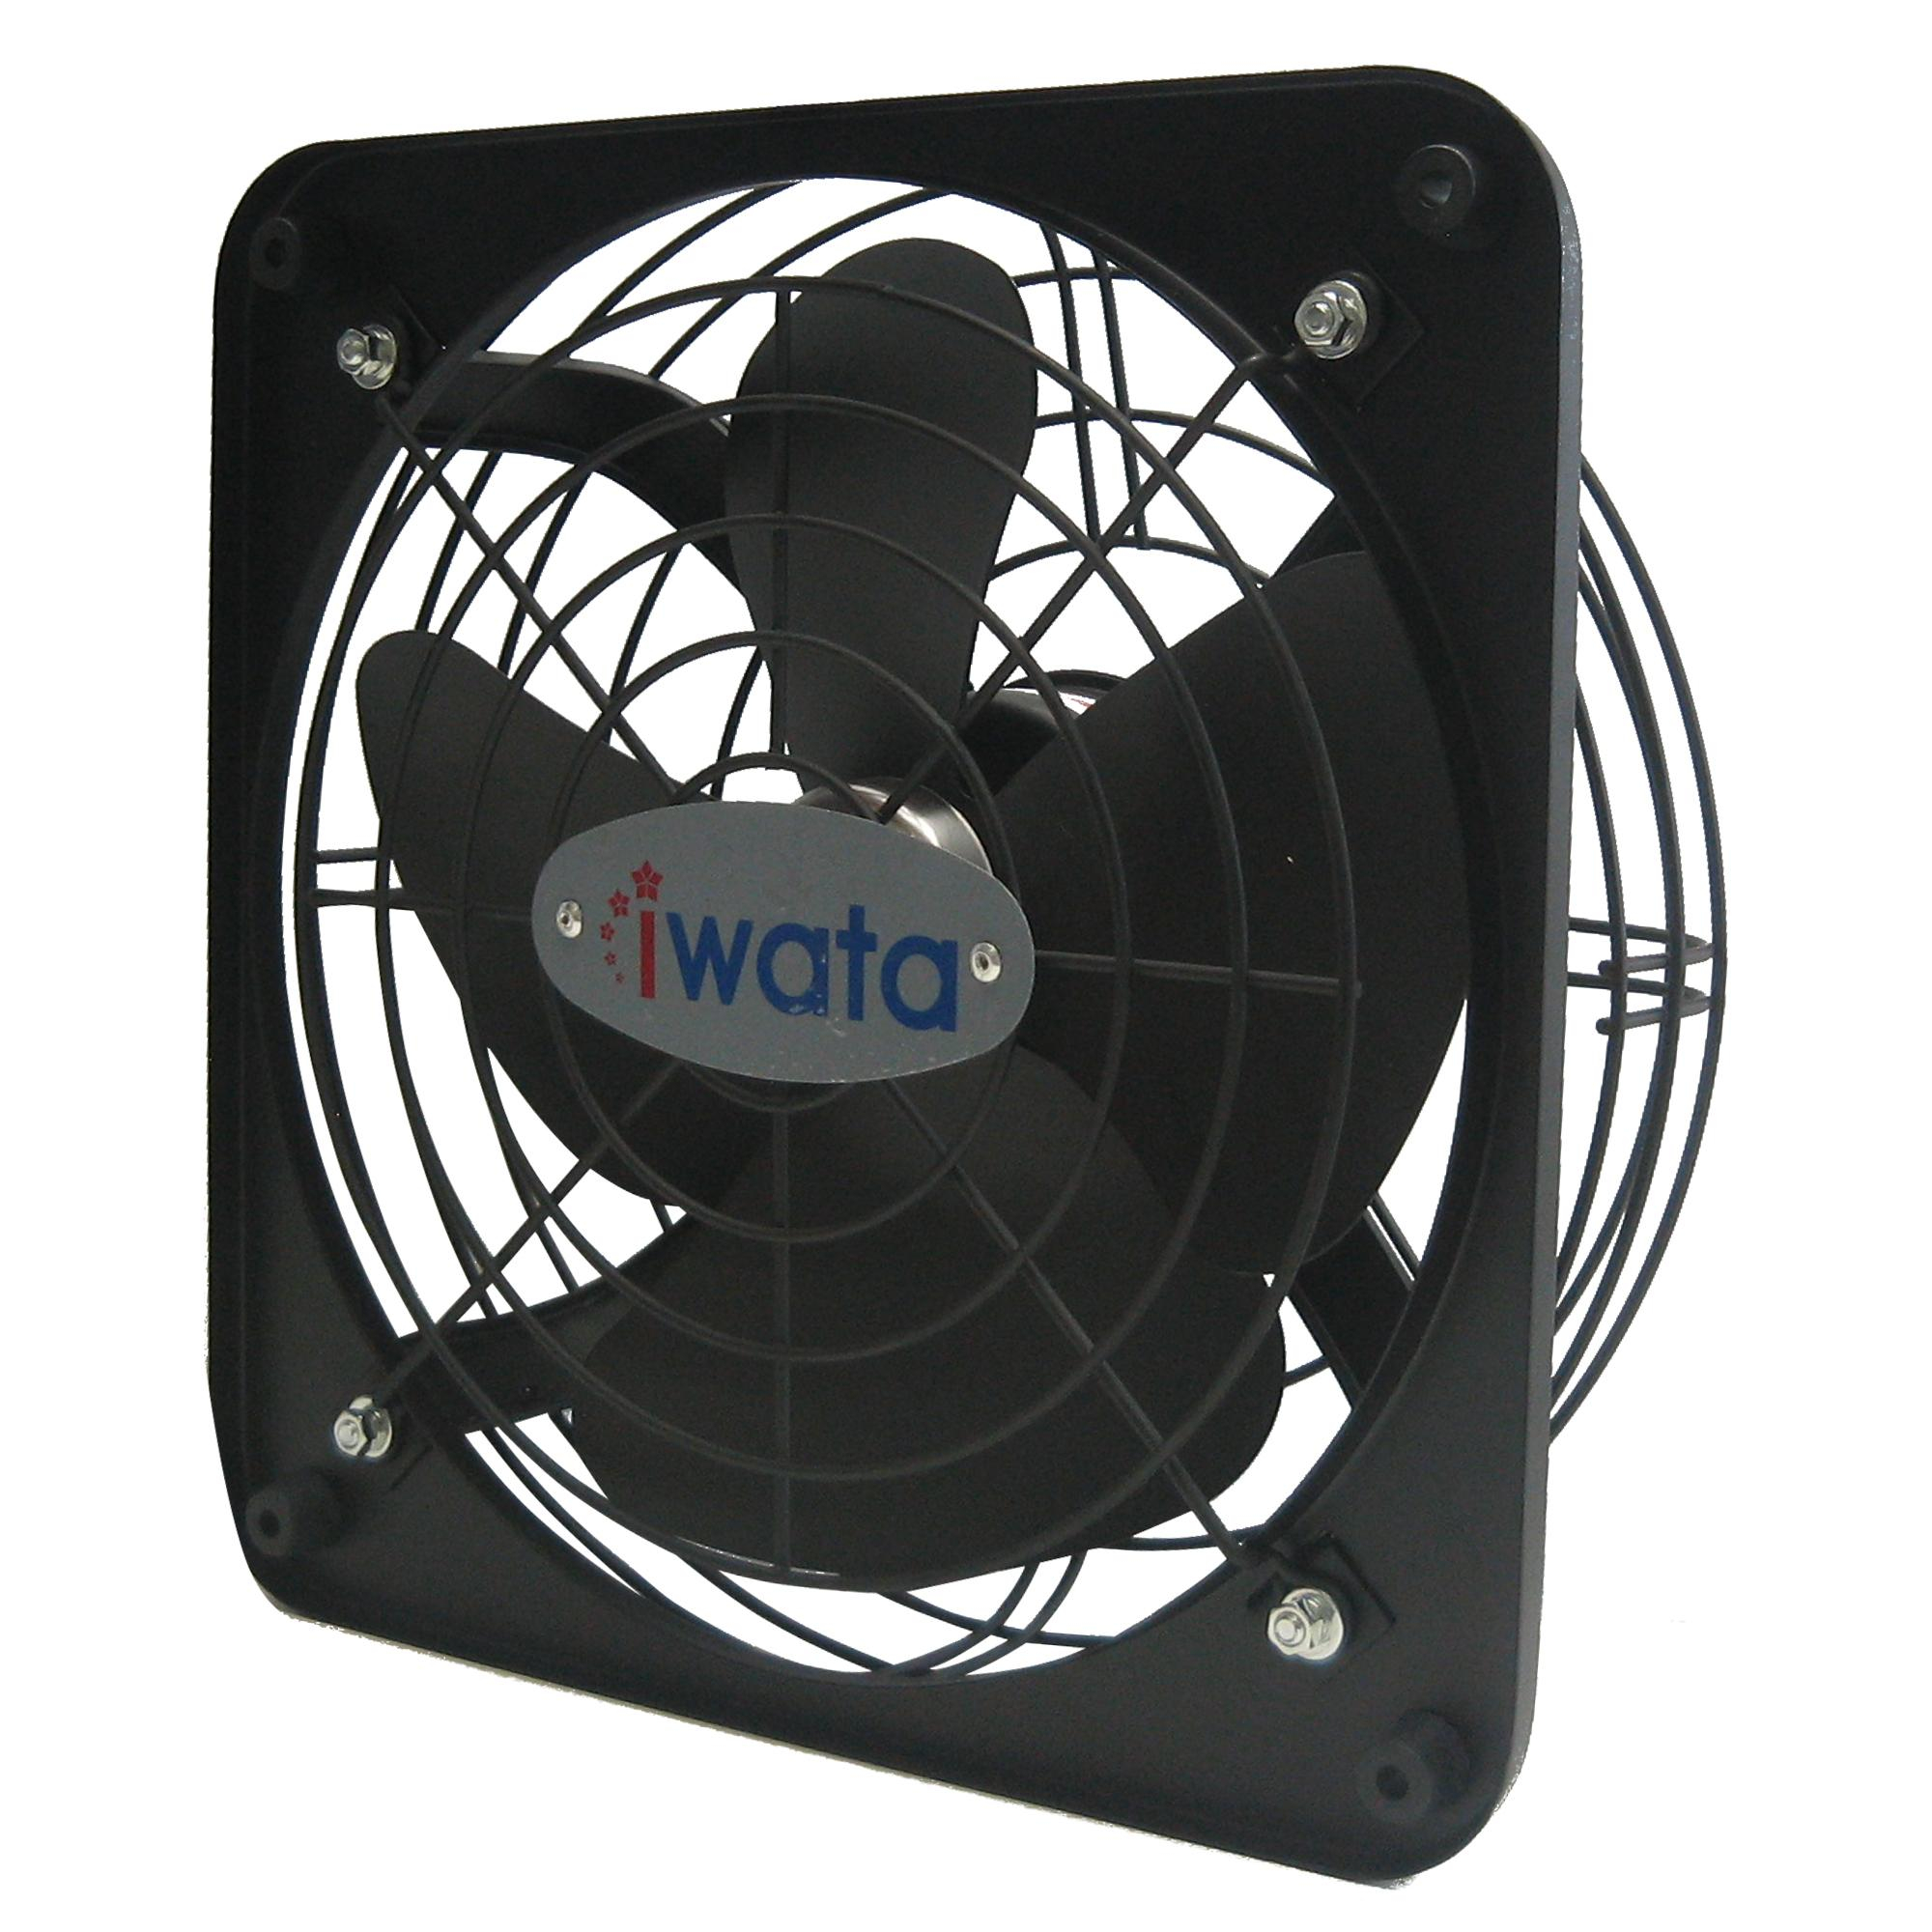 Iwata Tornado Grille Exf G12 Exhaust Fan intended for measurements 2000 X 2000